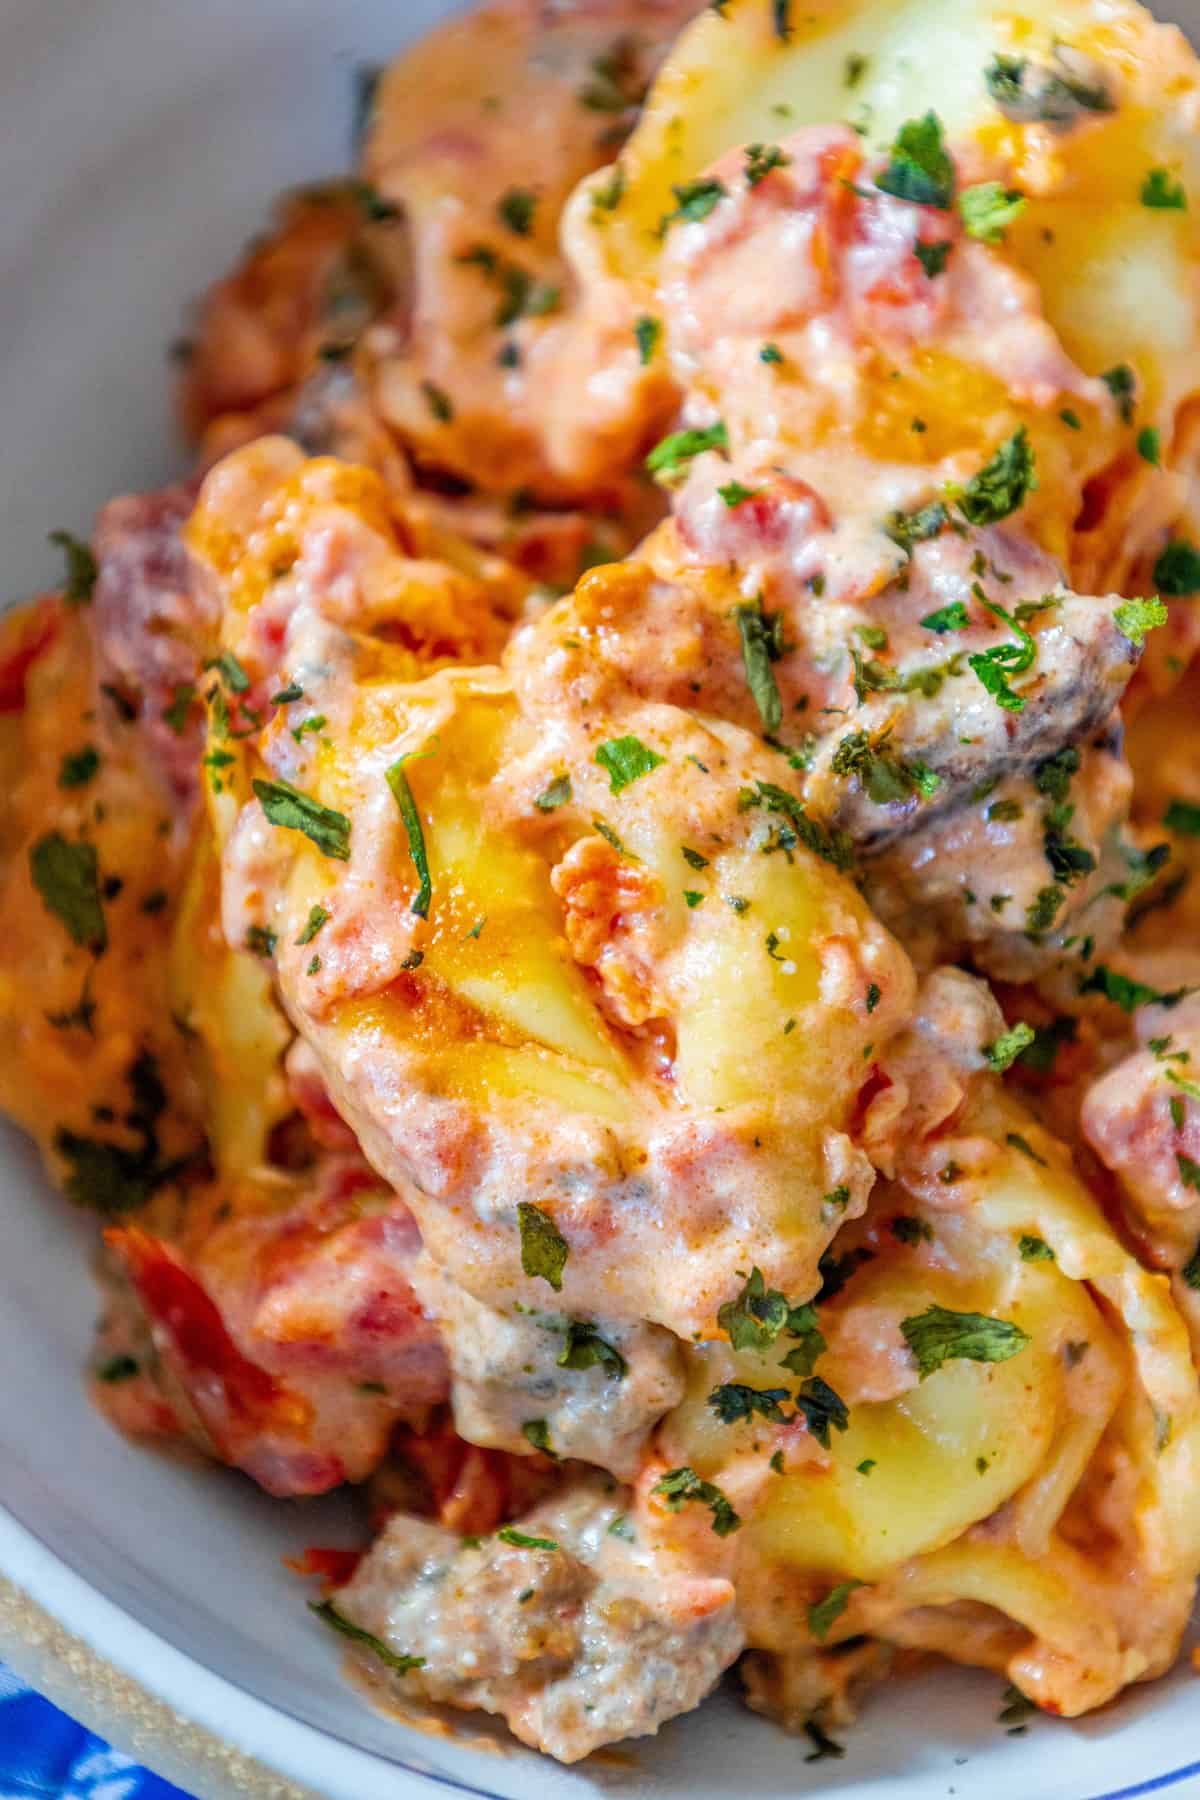 A cheesy bowl of potato salad with meat.